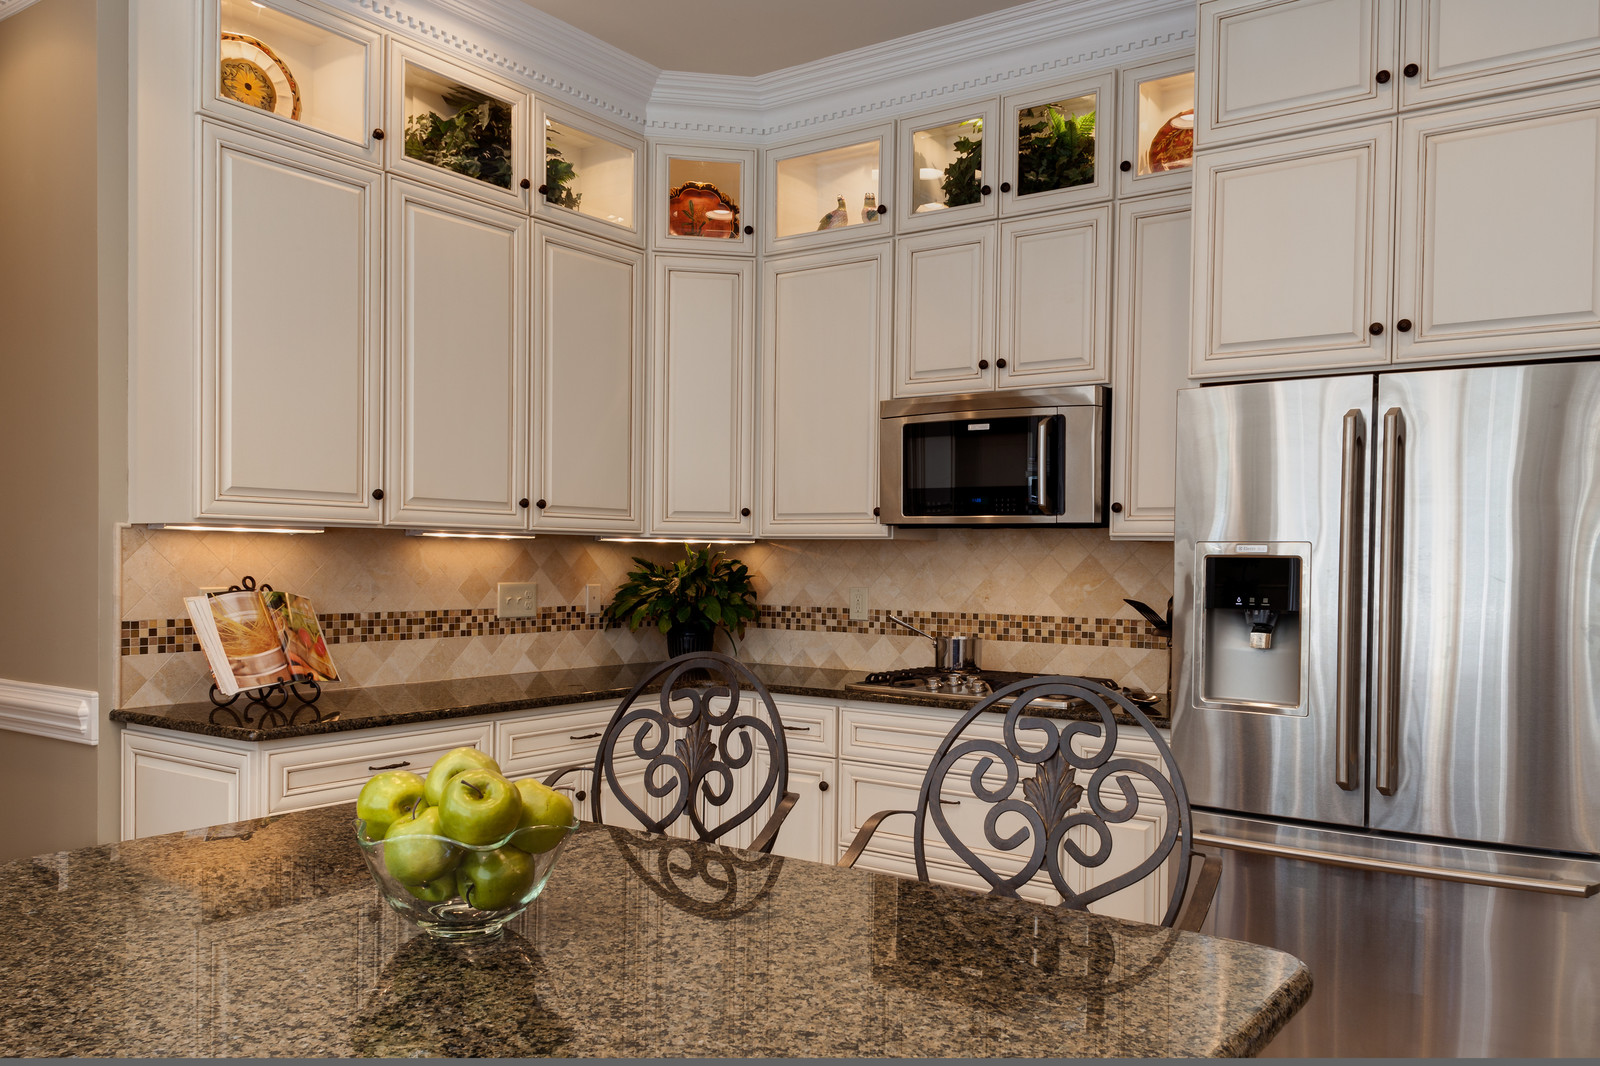 Modern White Kitchen Cabinets With Brown Granite Counters with Simple Decor